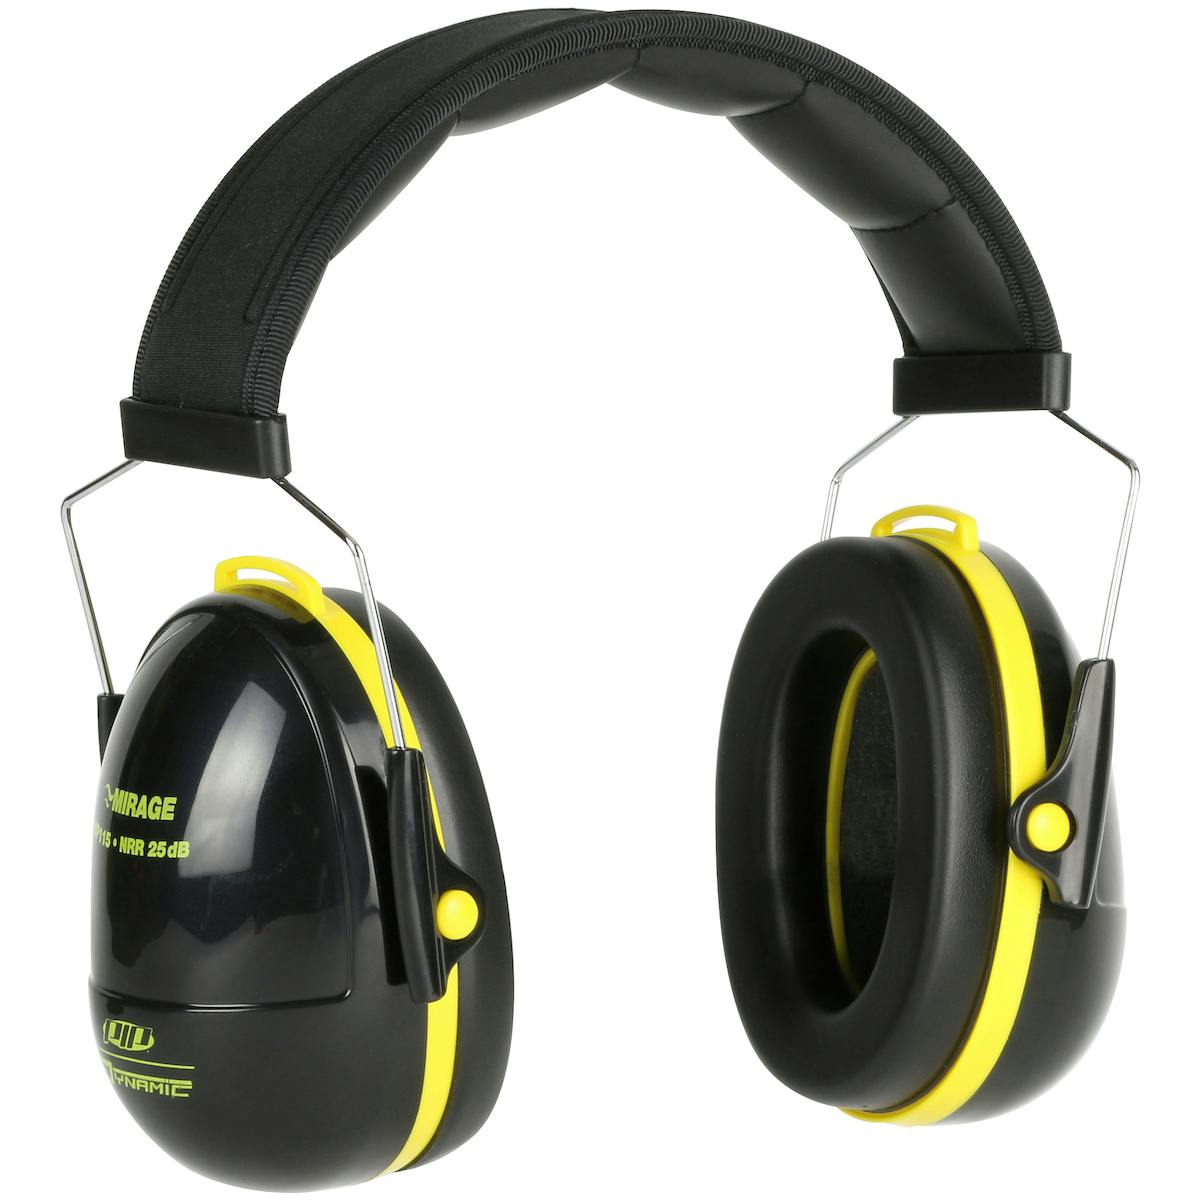 Passive Ear Muff with Adjustable Headband - NRR 25, Black (263-NP115) - OS_0